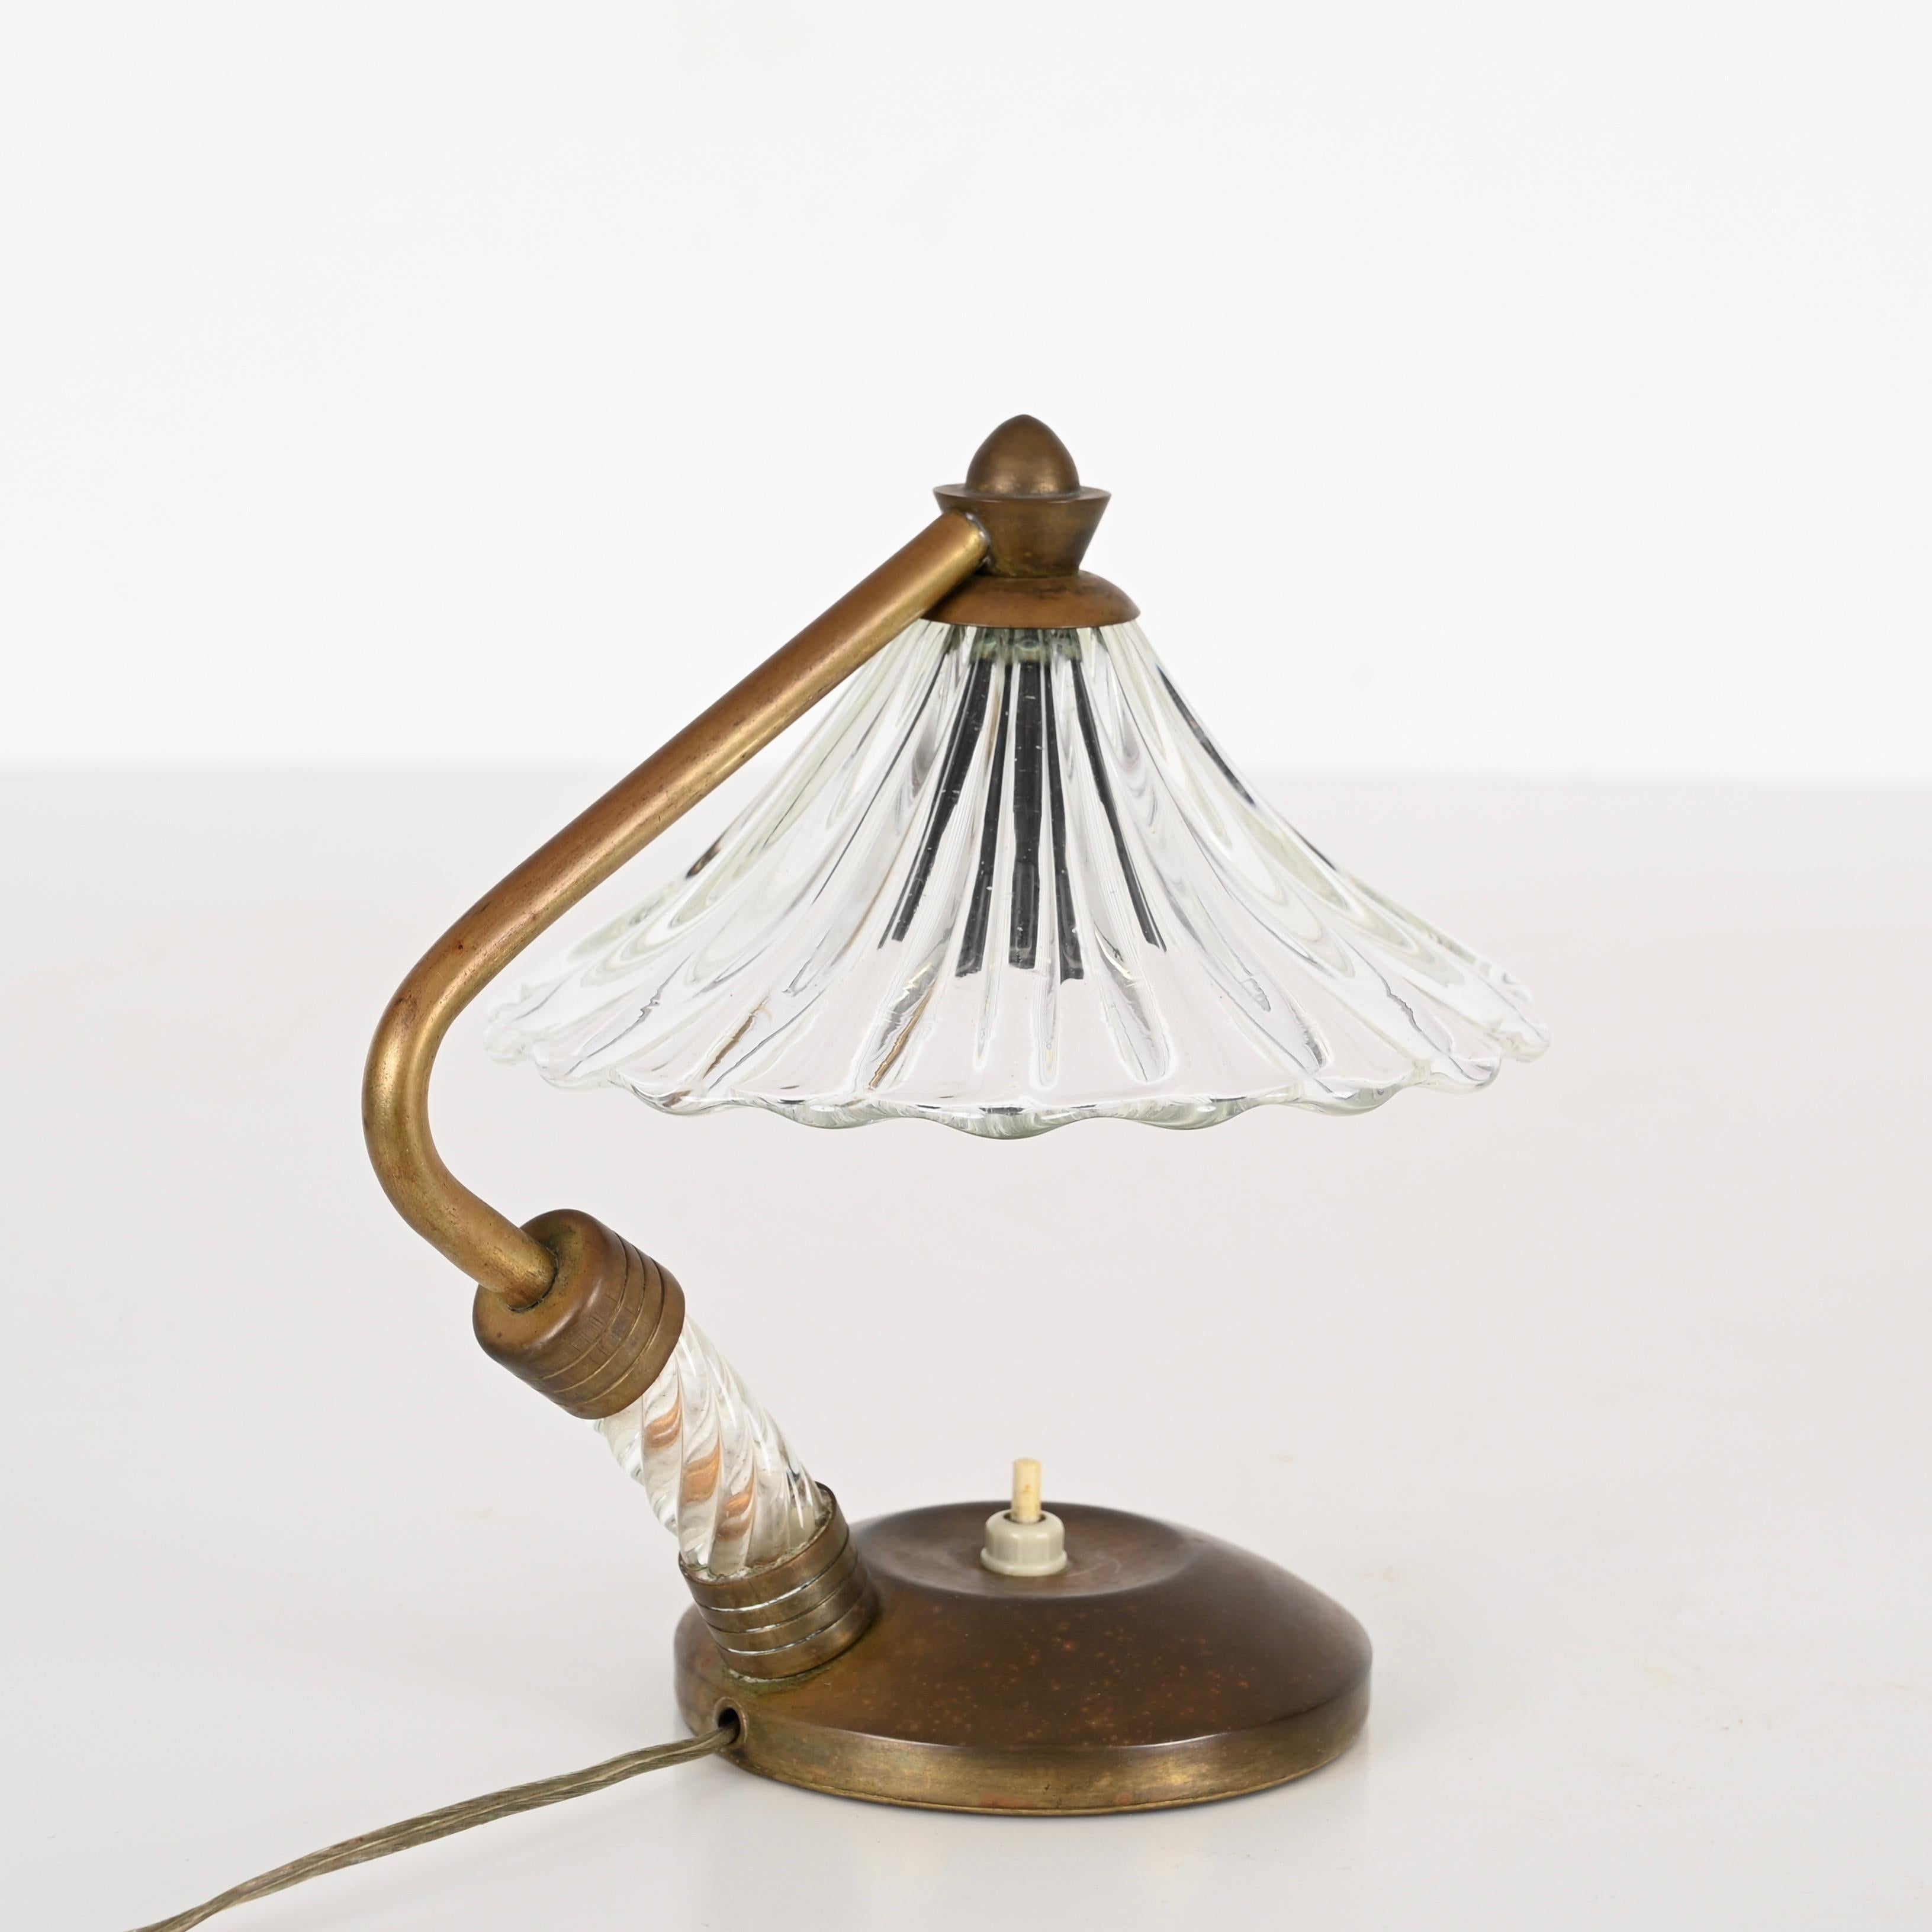 Bellflower Table Lamp in Murano Glass and Brass by Ercole Barovier, Italy 1940s For Sale 3